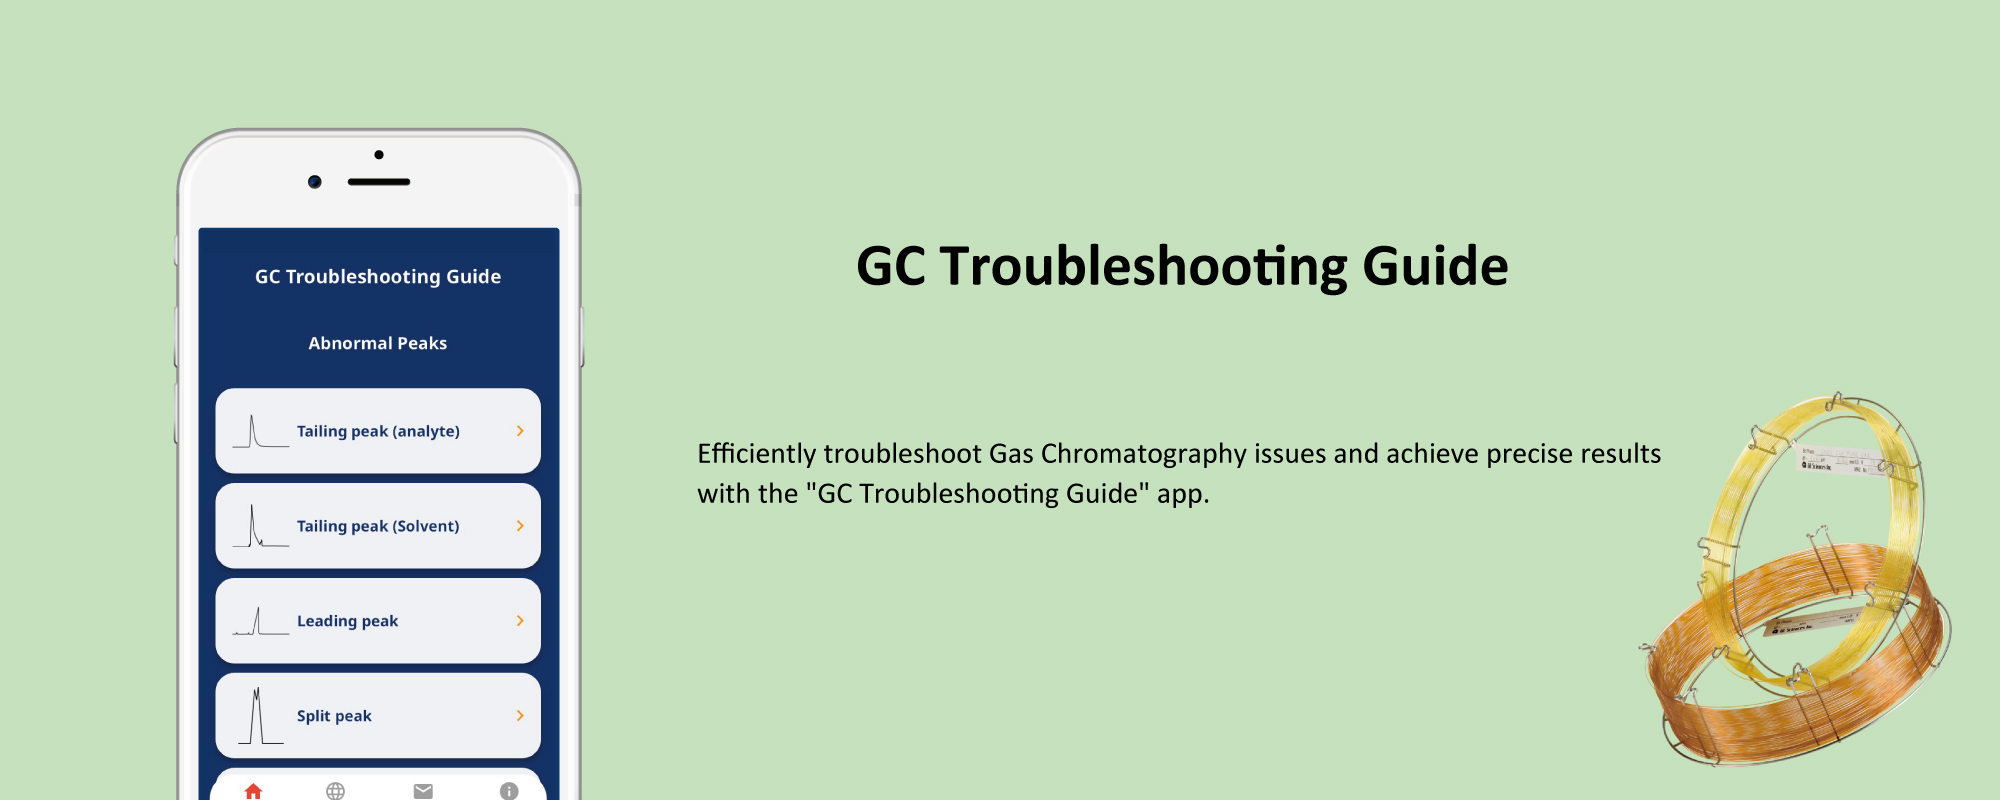 GC Troubleshooting Guide